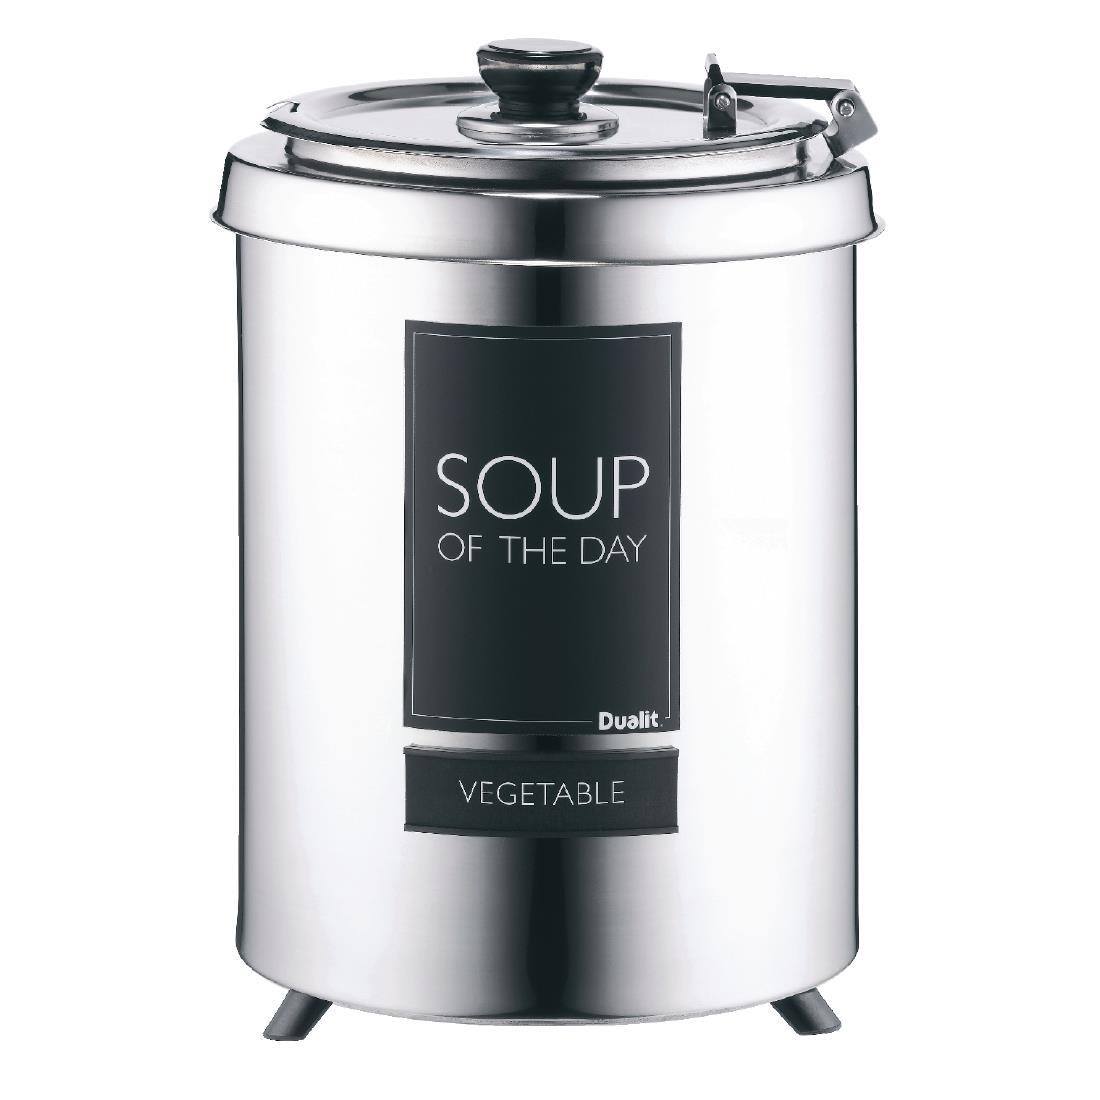 Dualit Soup Kettle Stainless Steel 71500 - CE383  - 1